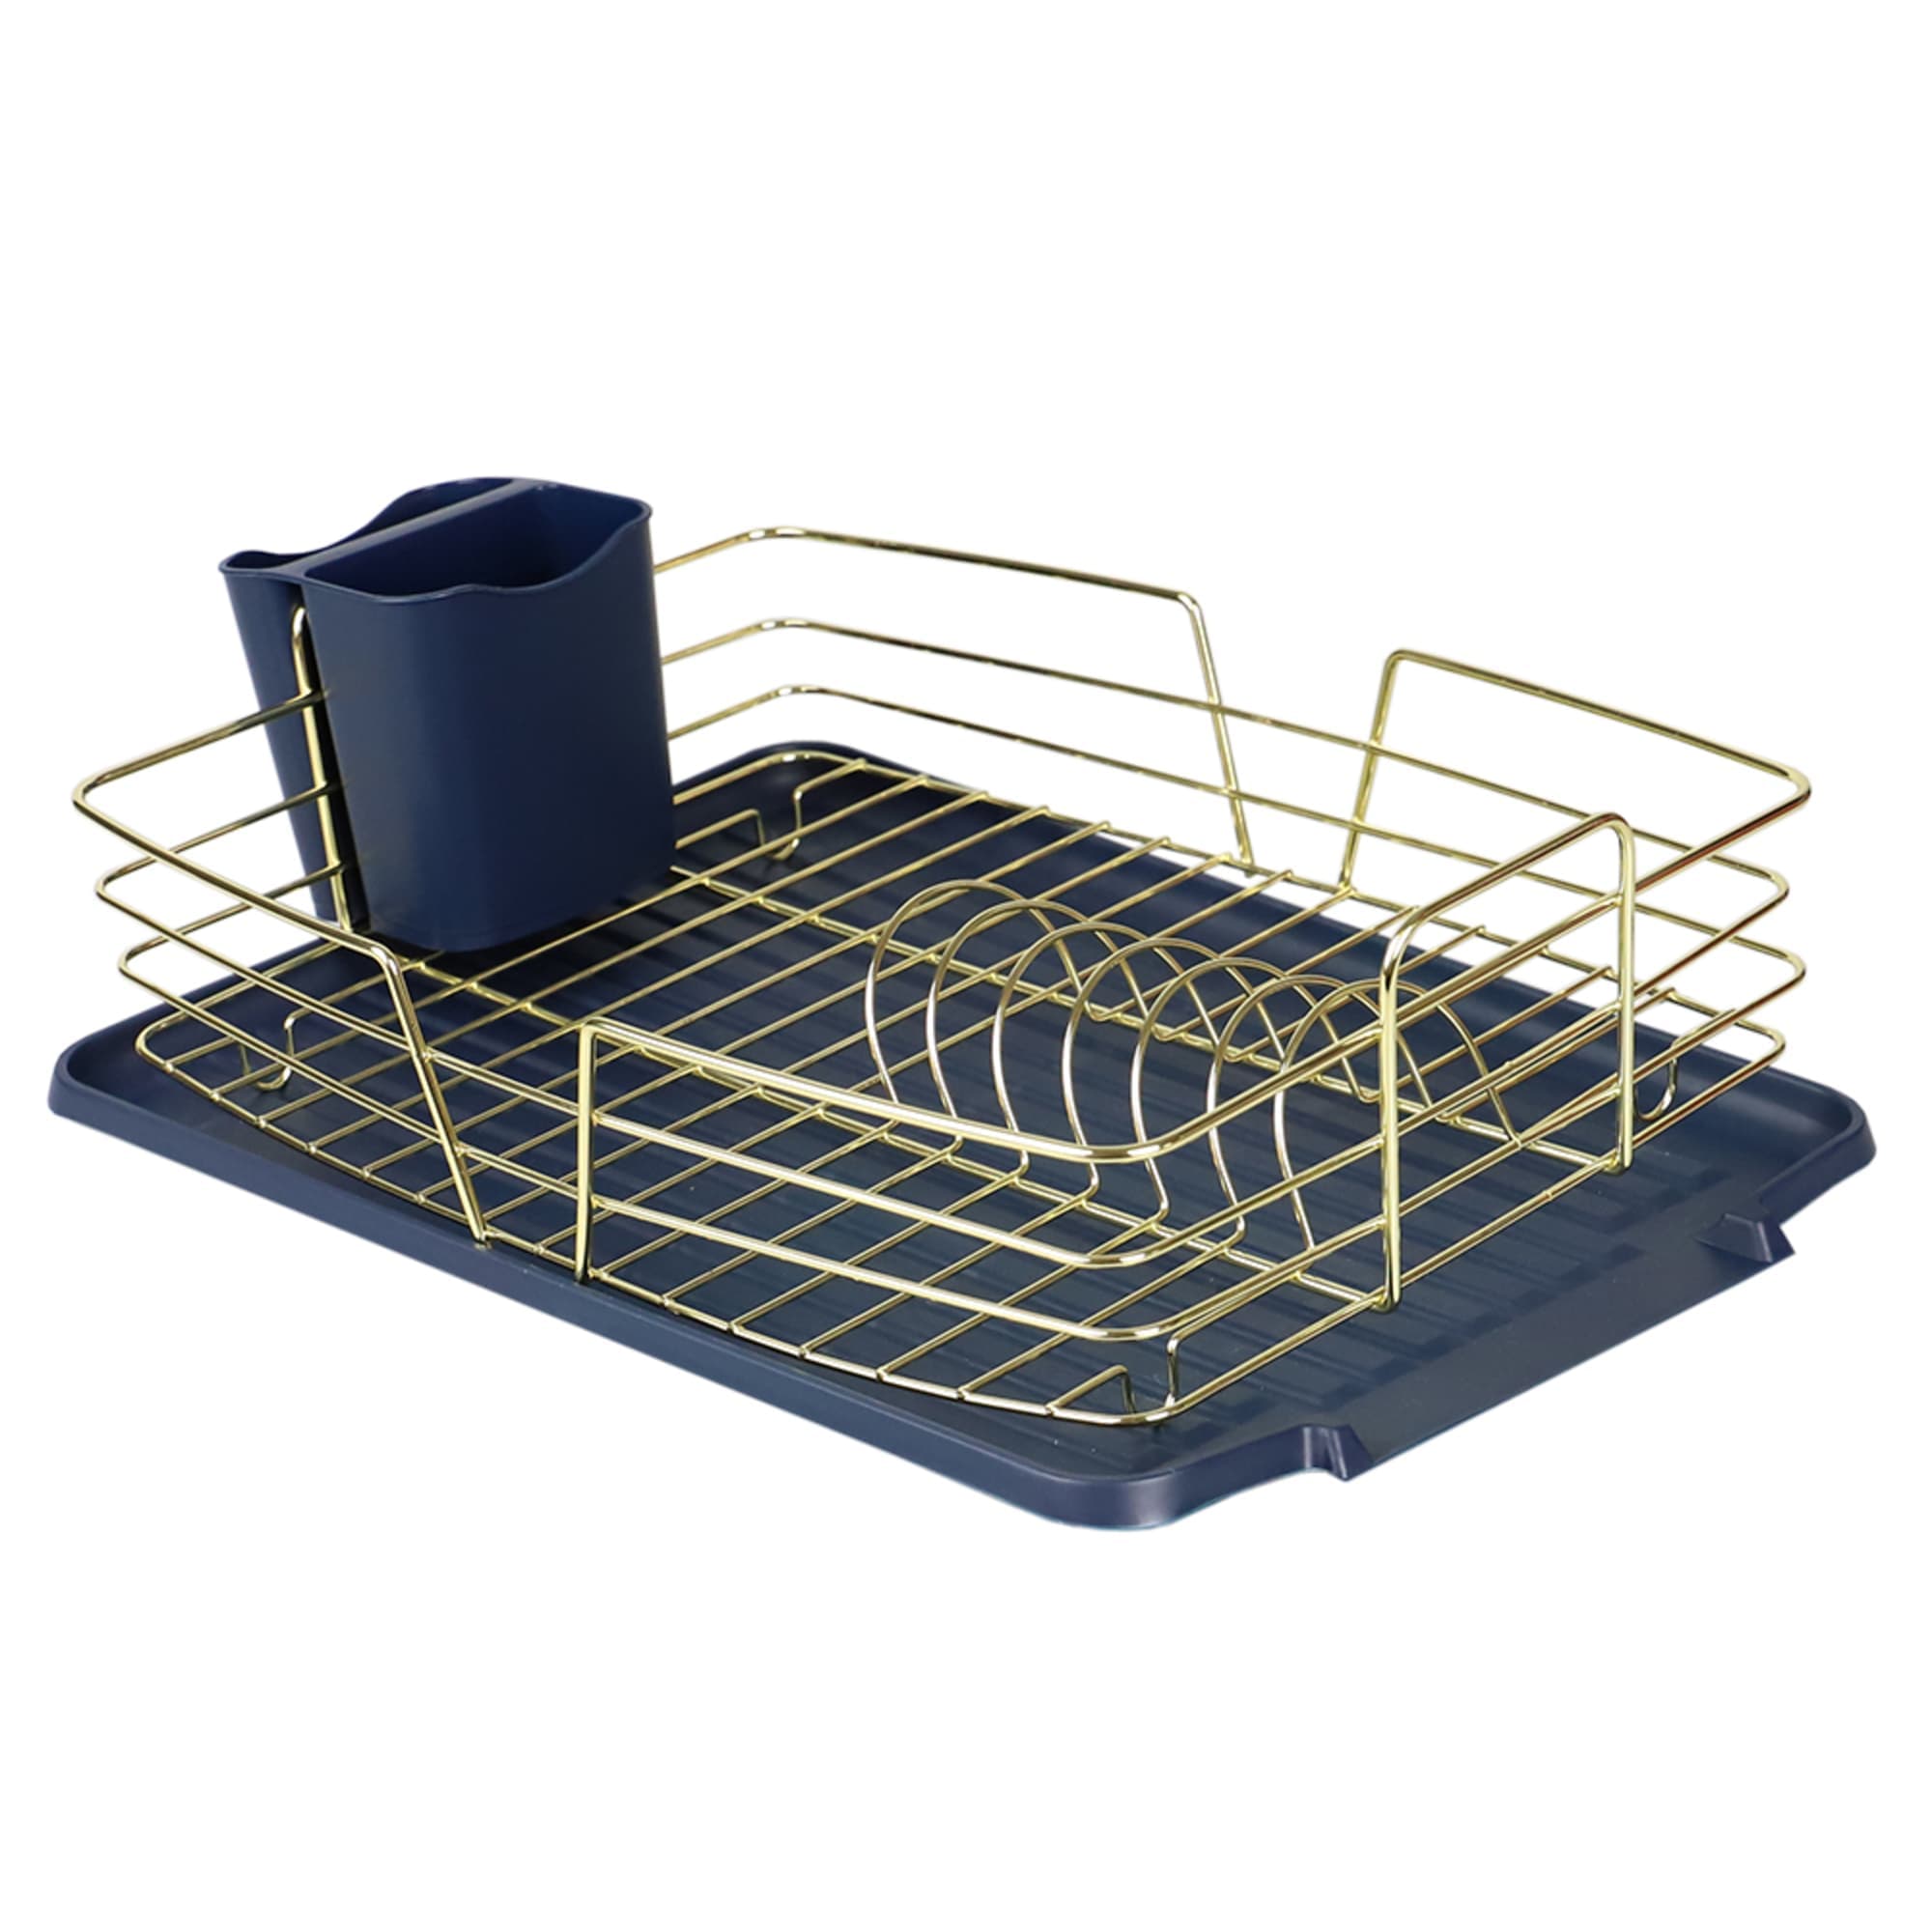 Michael Graves Design Deluxe Dish Rack with Gold Finish Wire and Removable Dual Compartment Utensil Holder, Navy Blue/Gold $14.00 EACH, CASE PACK OF 6